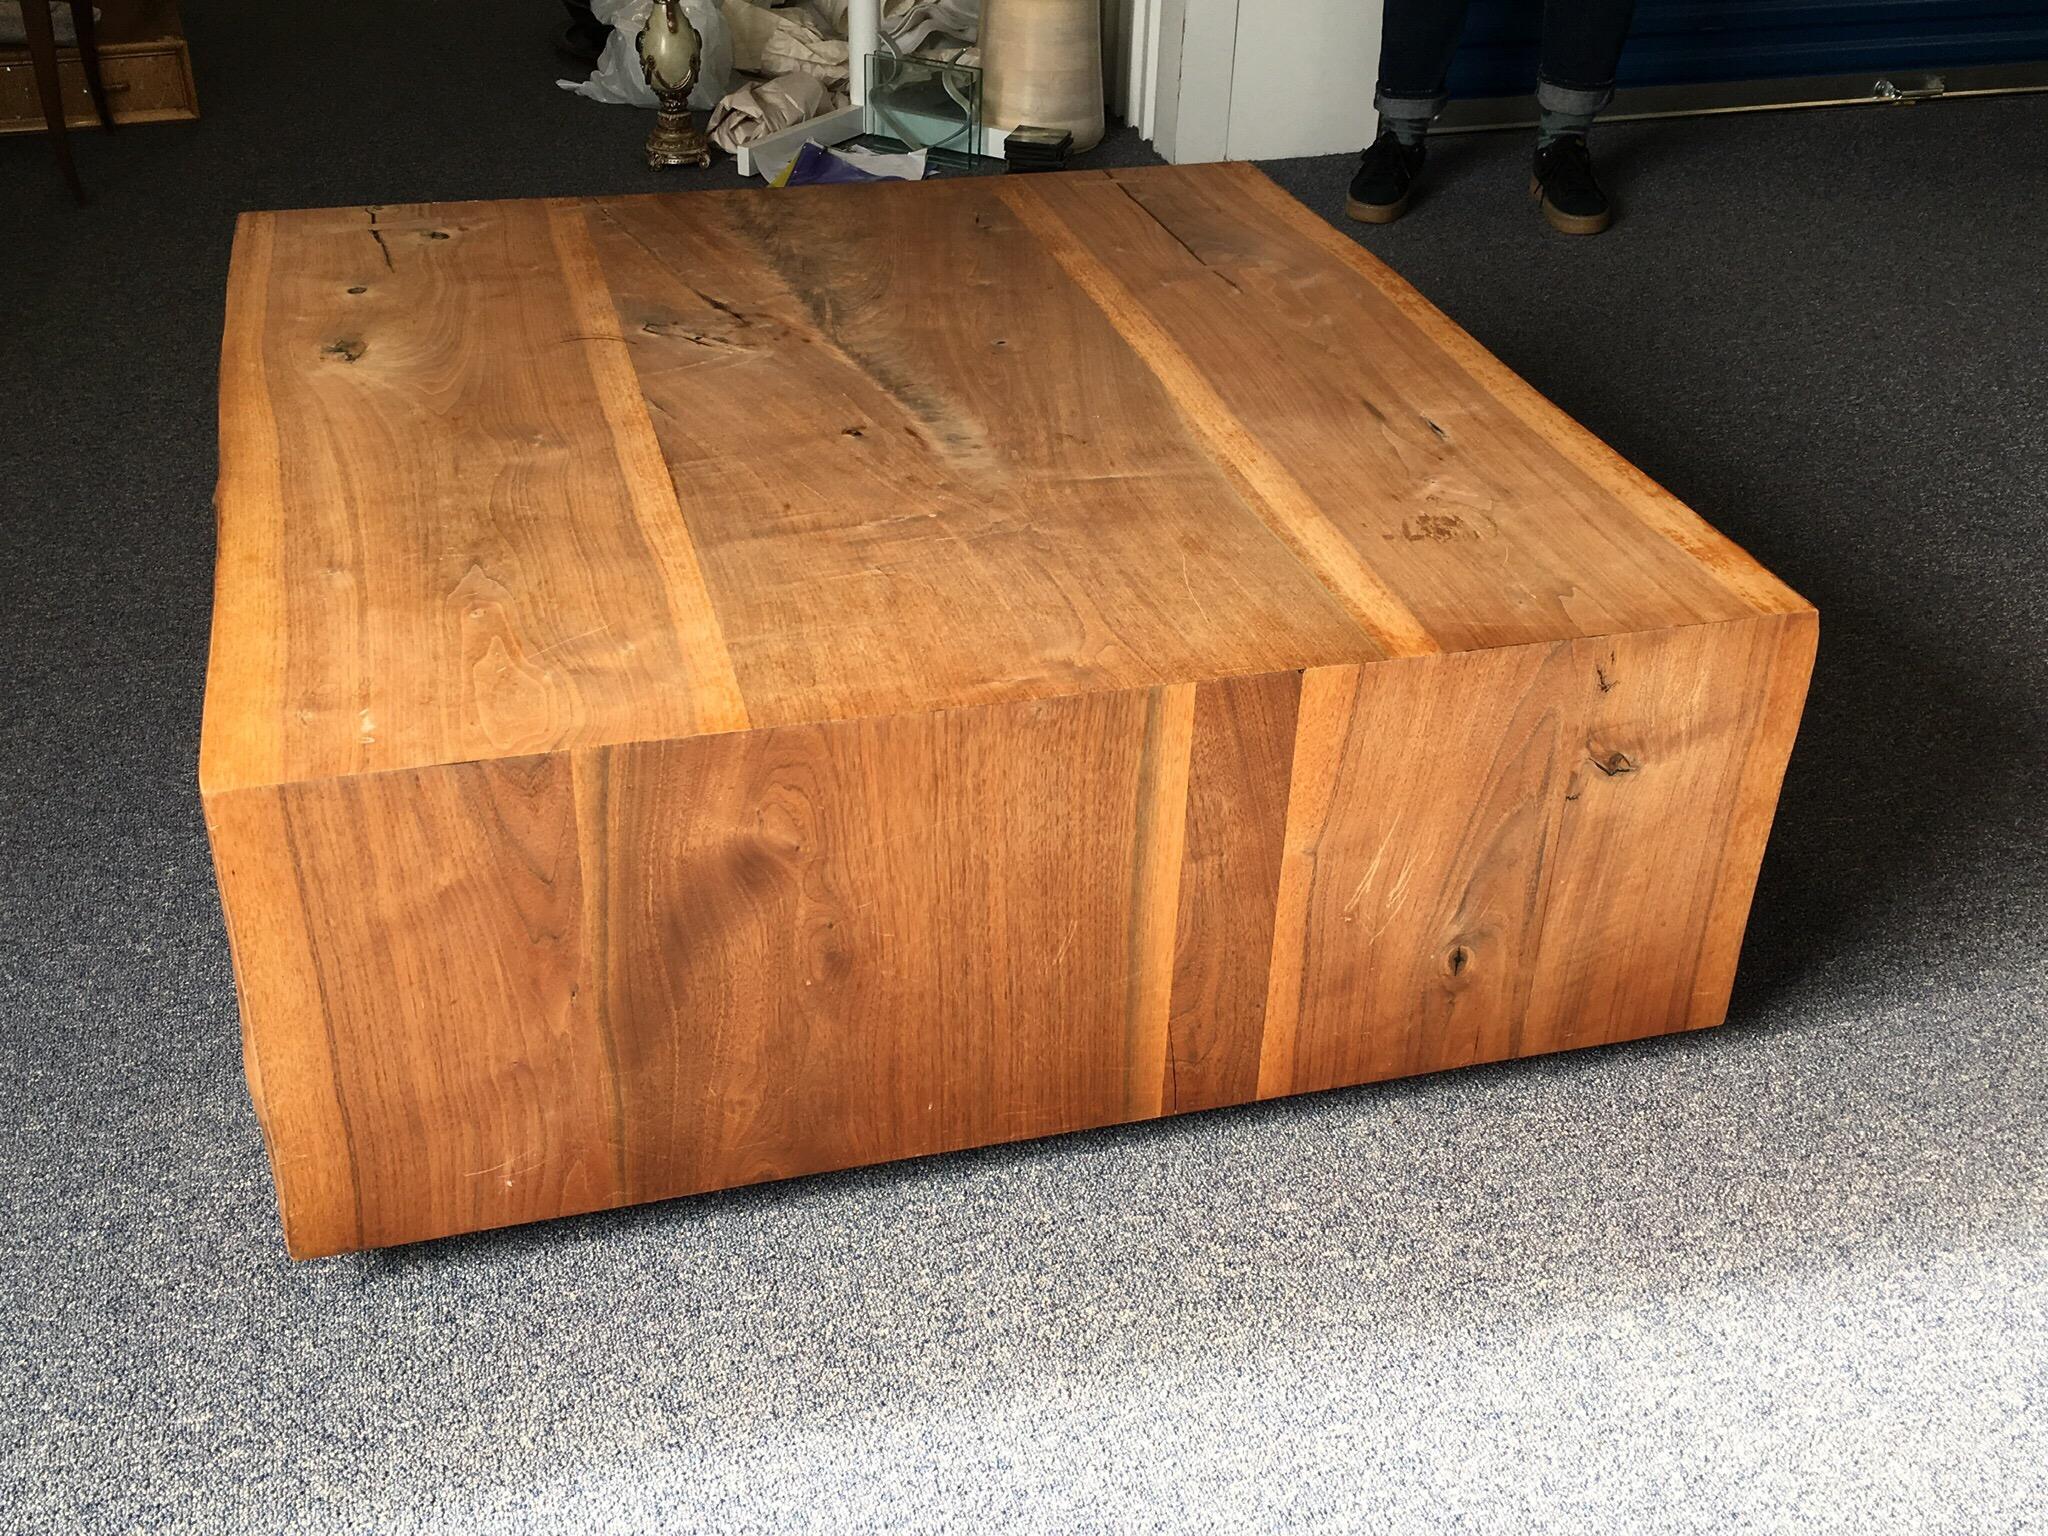 Raw Edge Wood Slab Square Coffee Table.  Four slab pieces, mitered edge corners with bow tie key joinery on the top. Wood feet with felt pads to protect wood floors.  Solid wood, beautiful coffee table. Significant wear and fading to finish.  Some